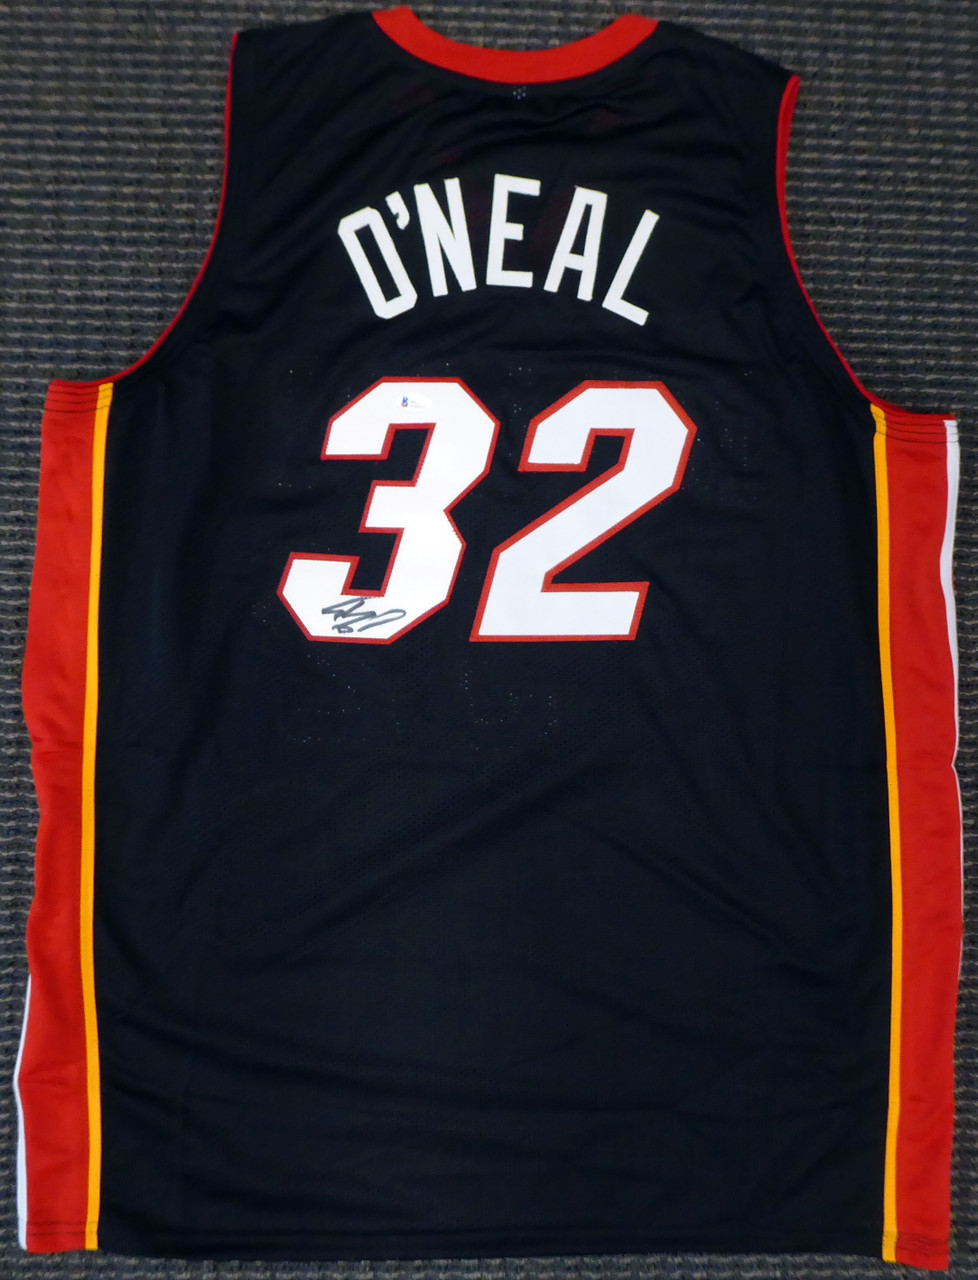 Shaquille O’Neal Miami Heat Jersey